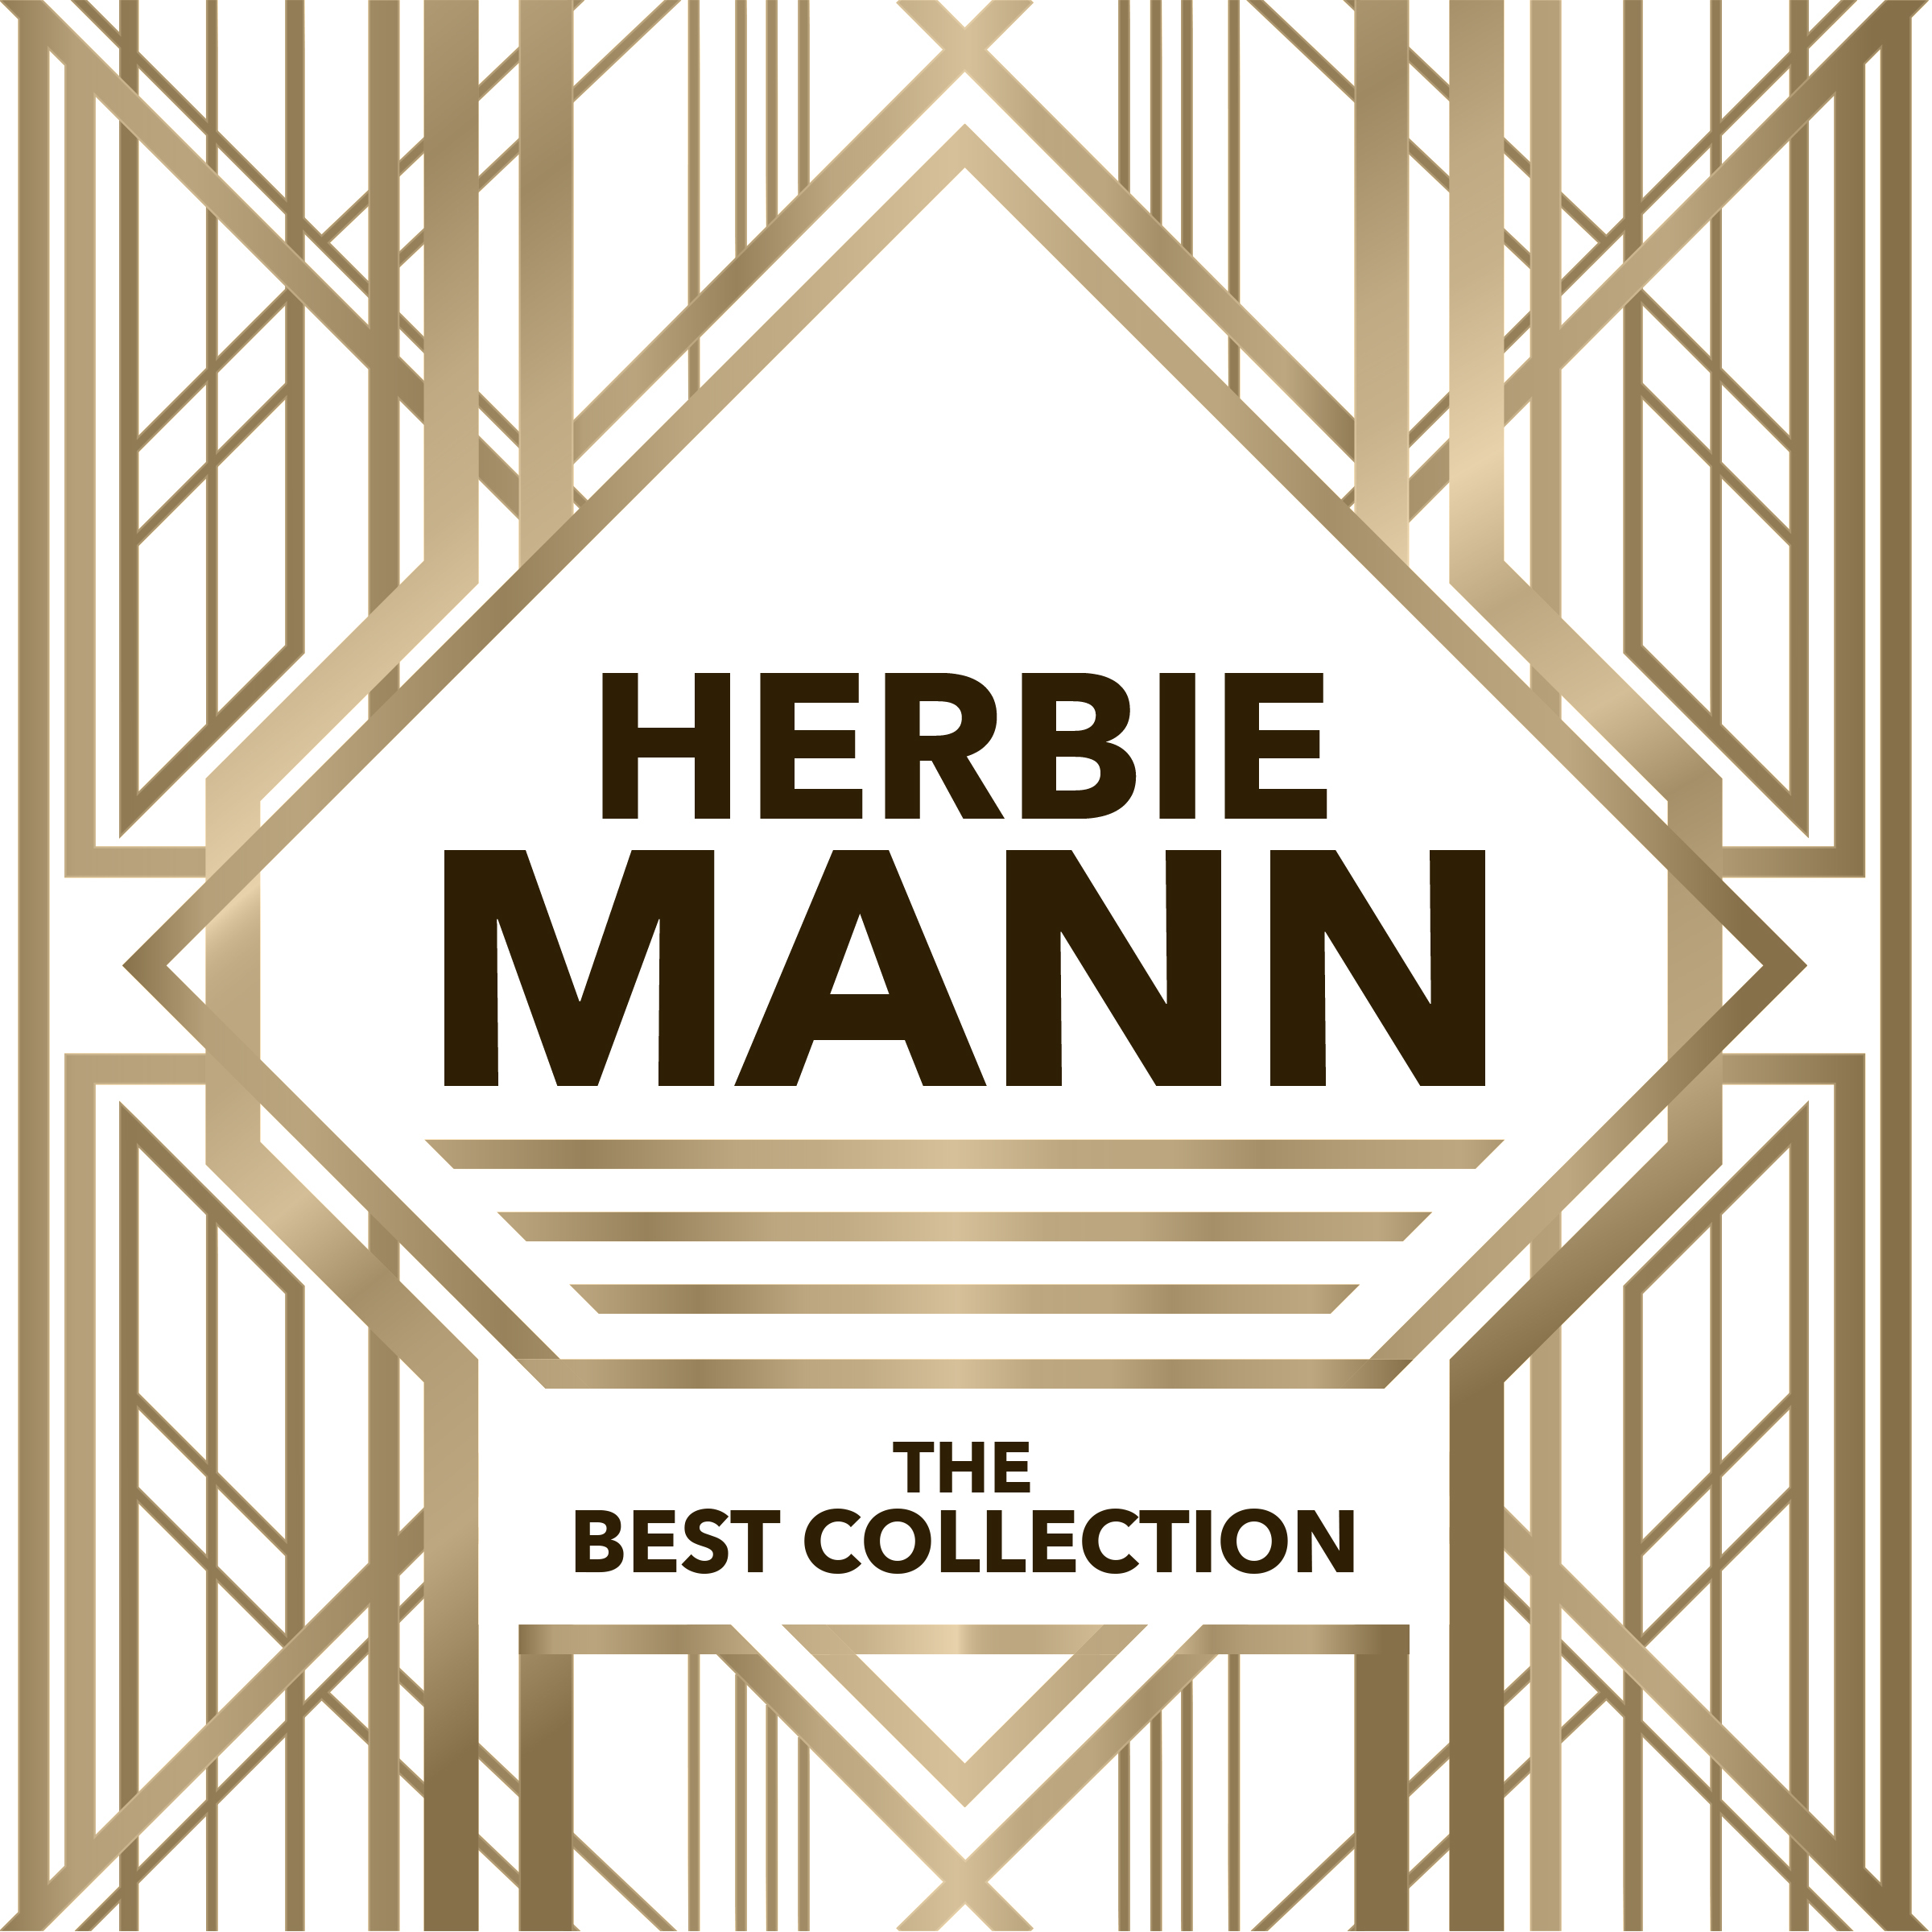 Herbie Mann - The Best Collection